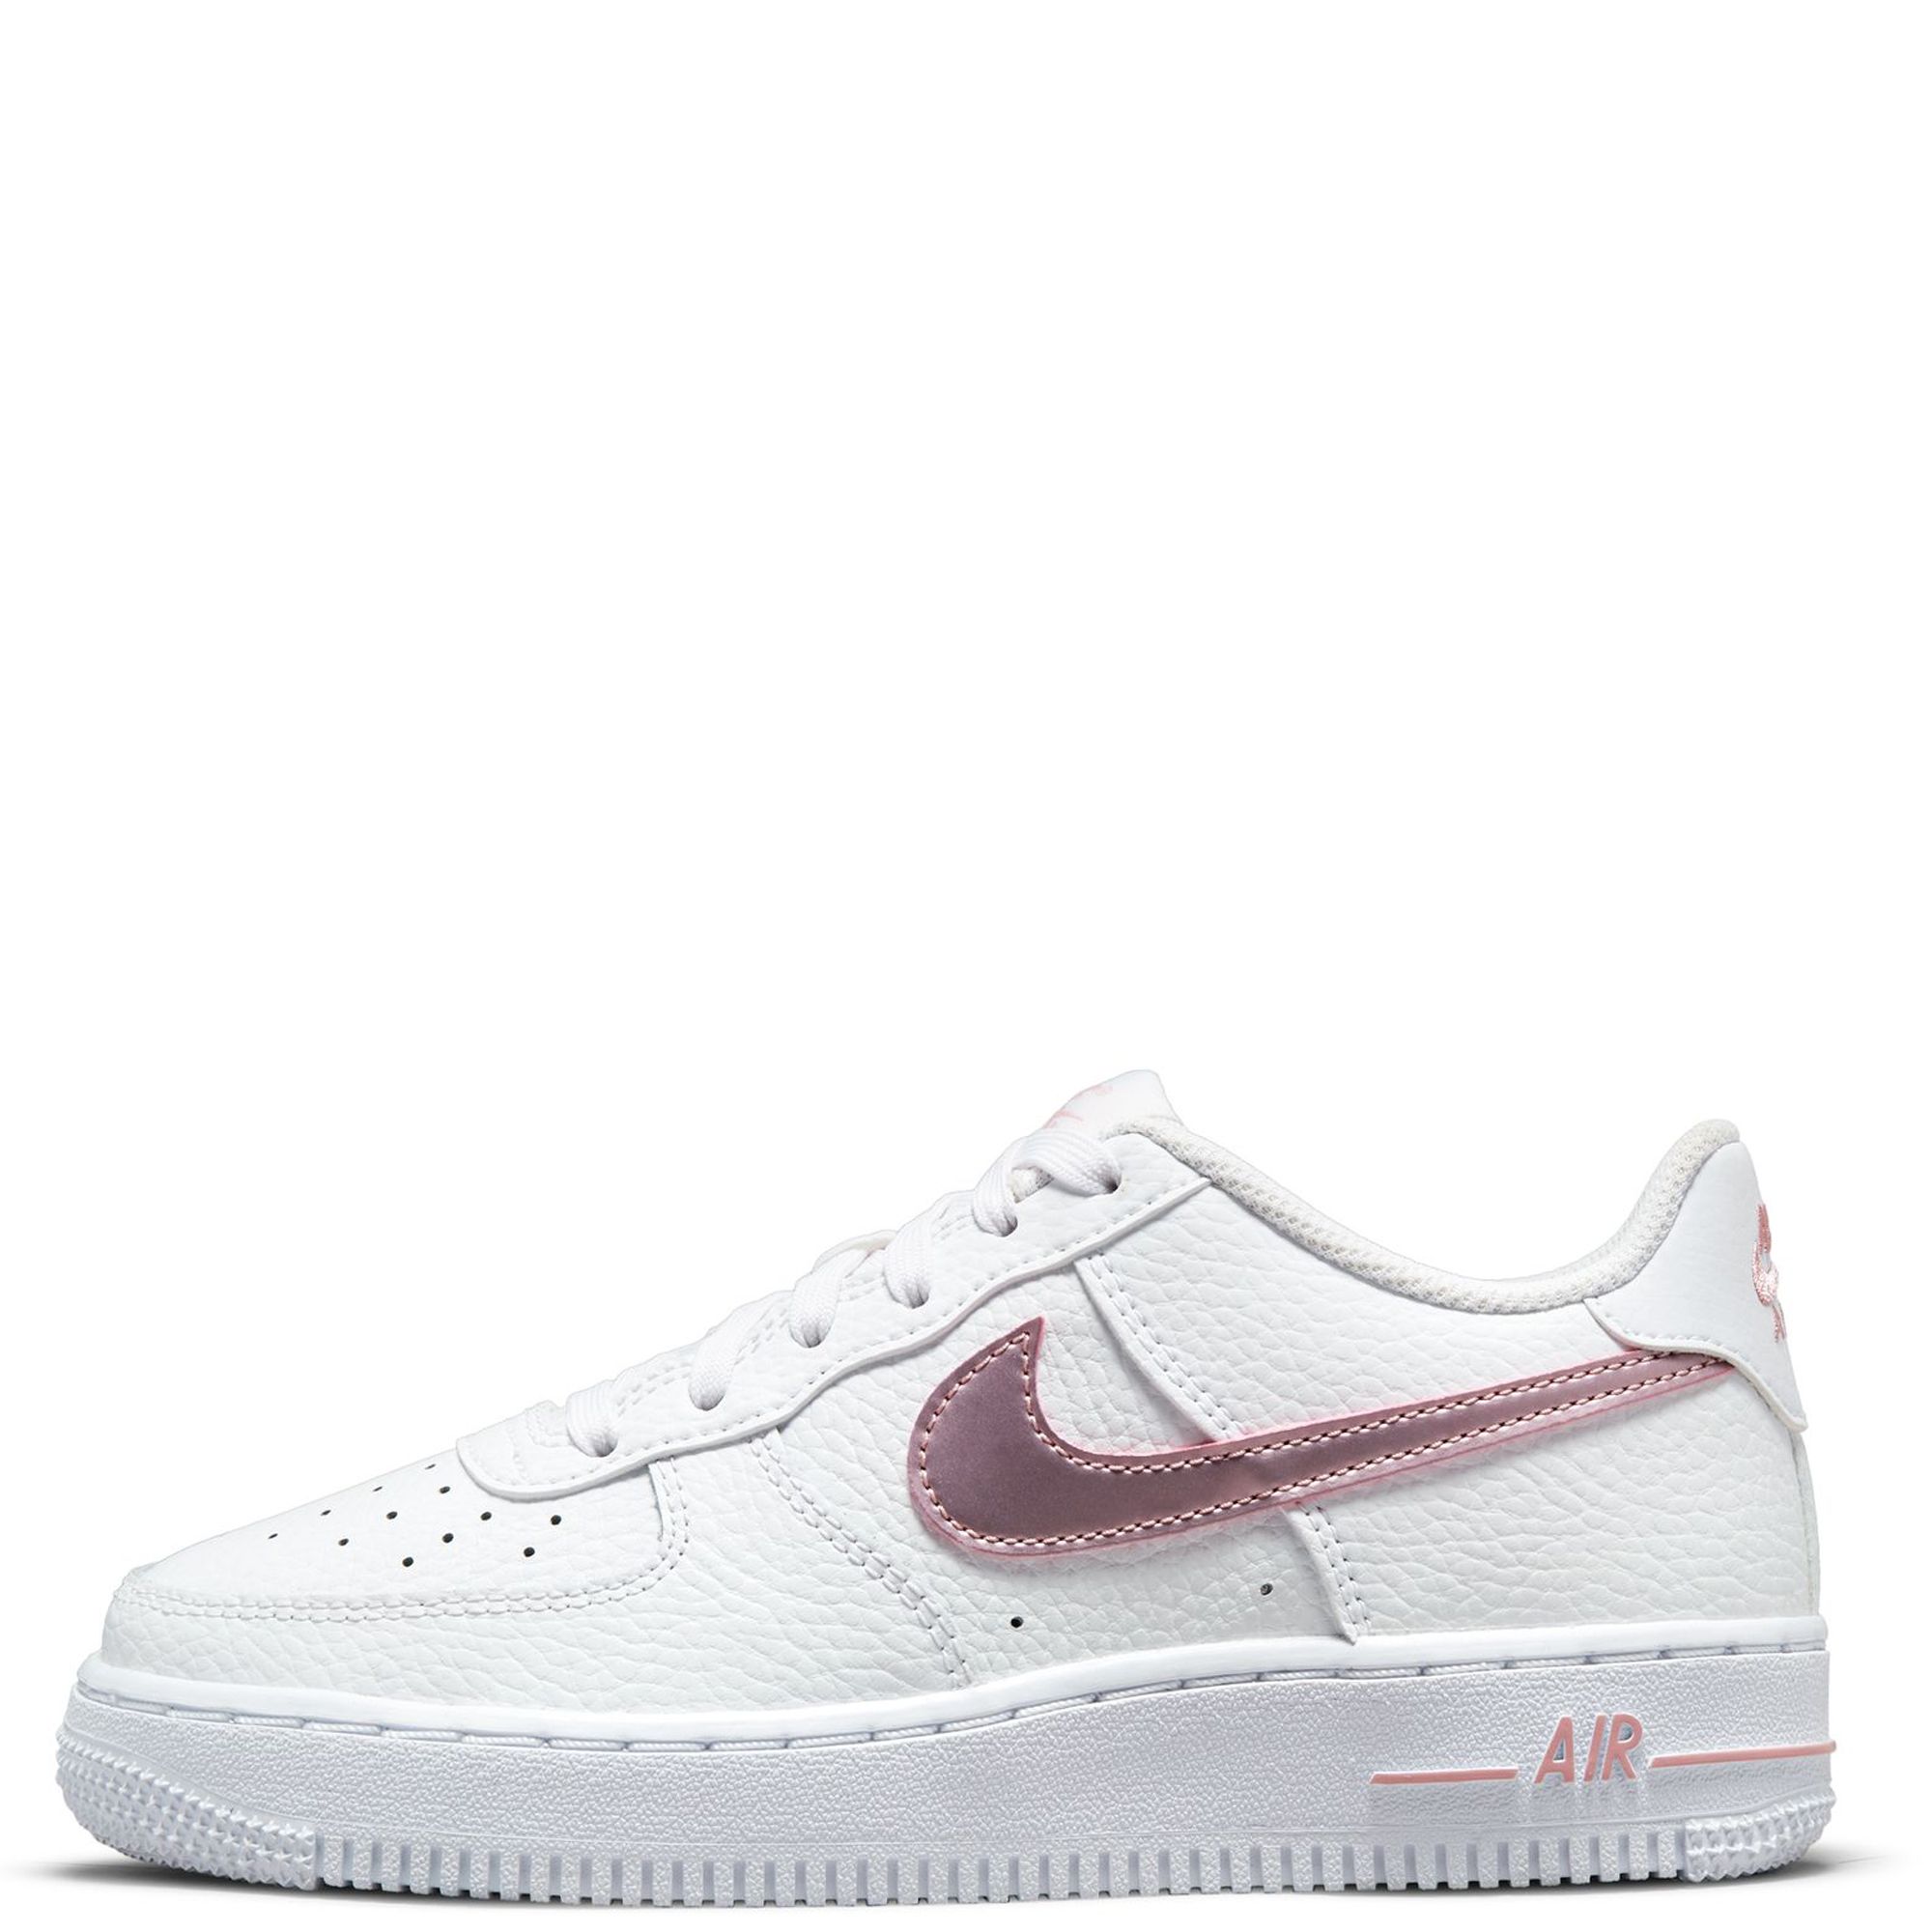 Pink Air Force 1 Shoes.